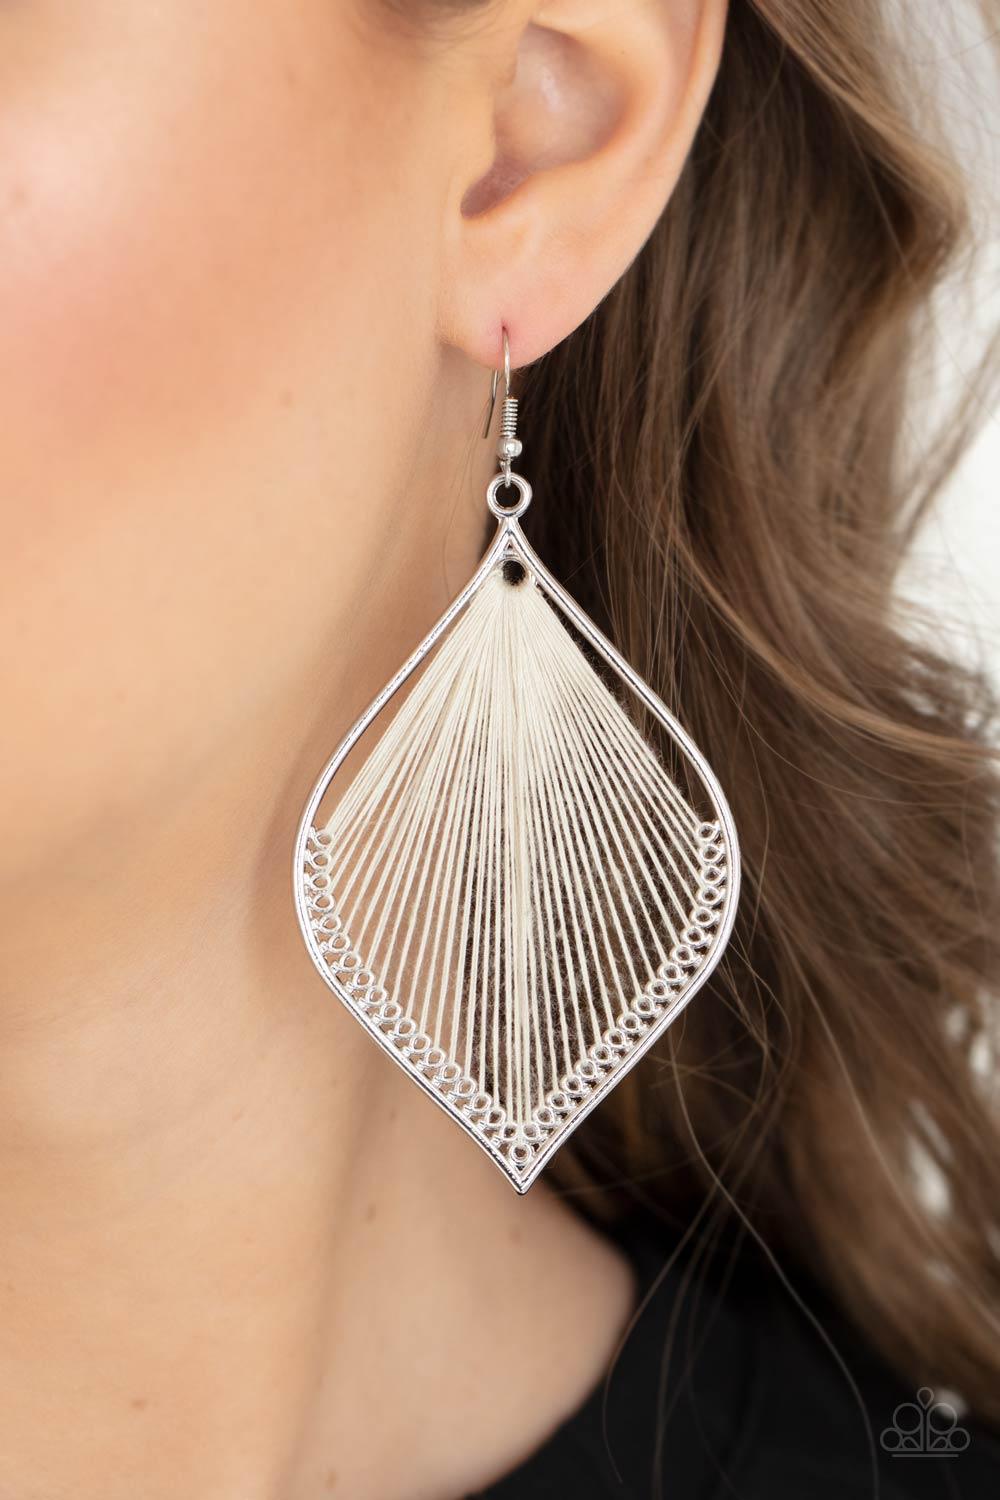 Paparazzi Accessories String Theory - White White string is threaded through small hoops inside a silver mandala-shaped frame for a vibrant artistic adornment. Earring attaches to a standard fishhook fitting. Sold as one pair of earrings. Jewelry